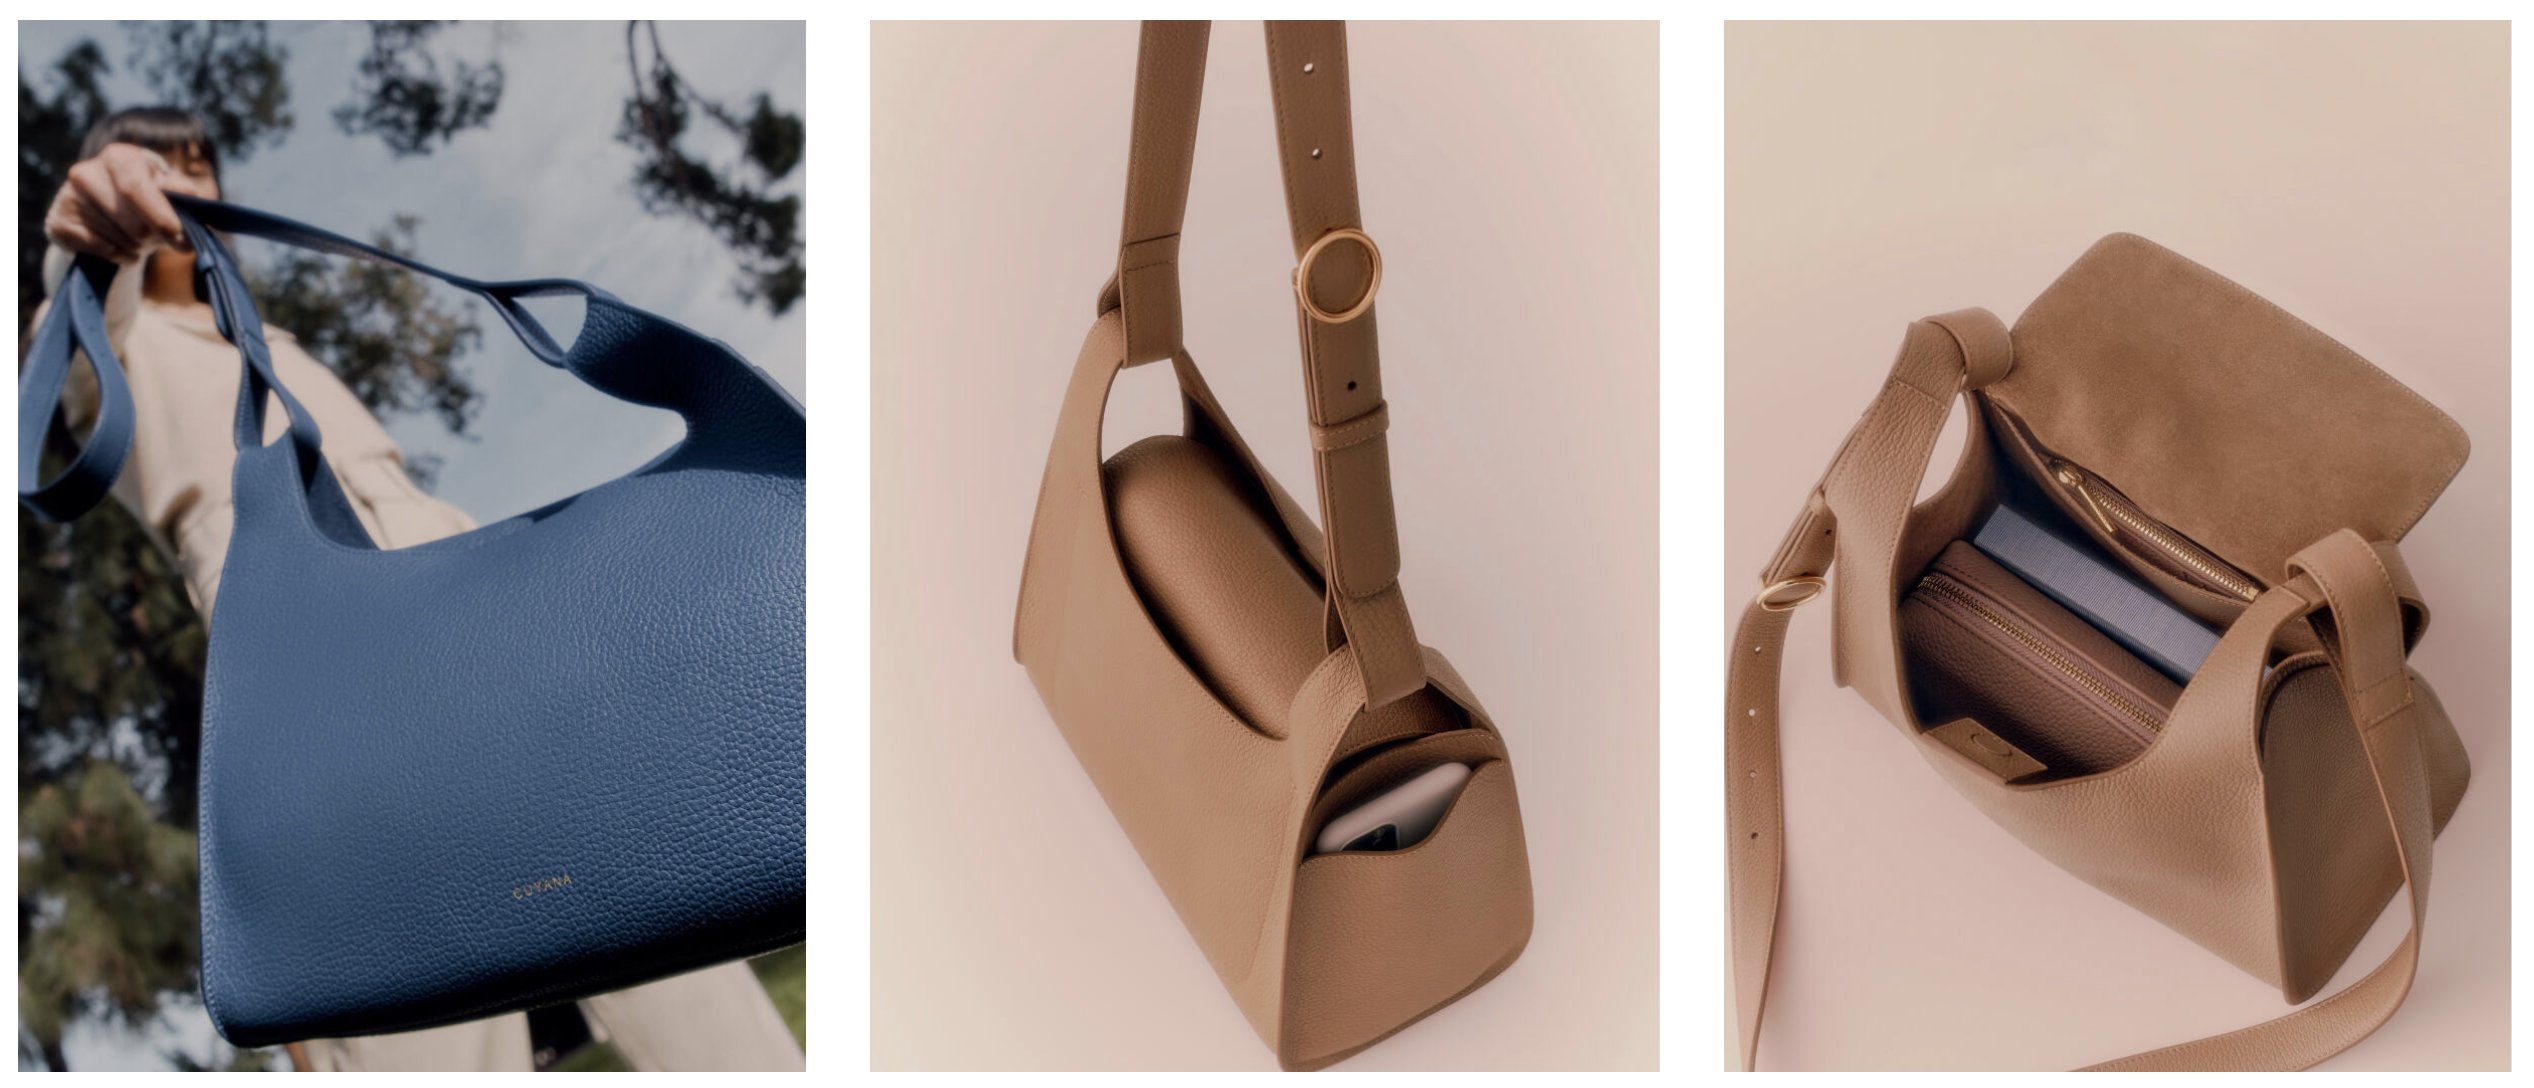 Cuyana on X: Designed for those quick errands and outings, our